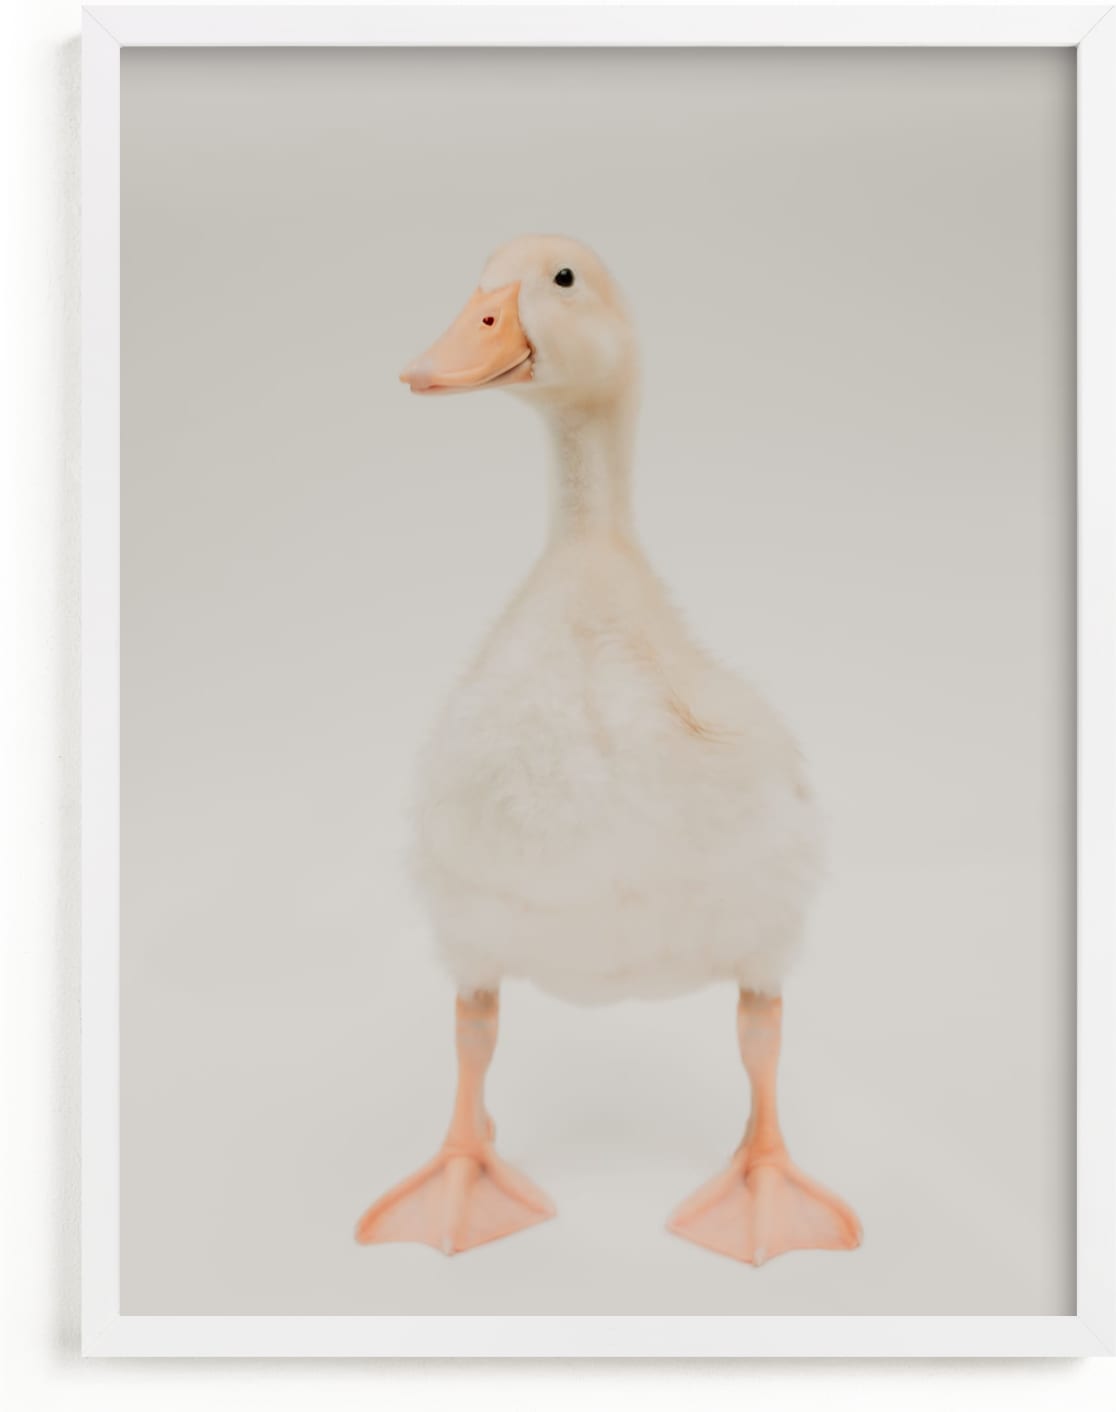 This is a ivory kids wall art by Alicia Abla called quack quack.